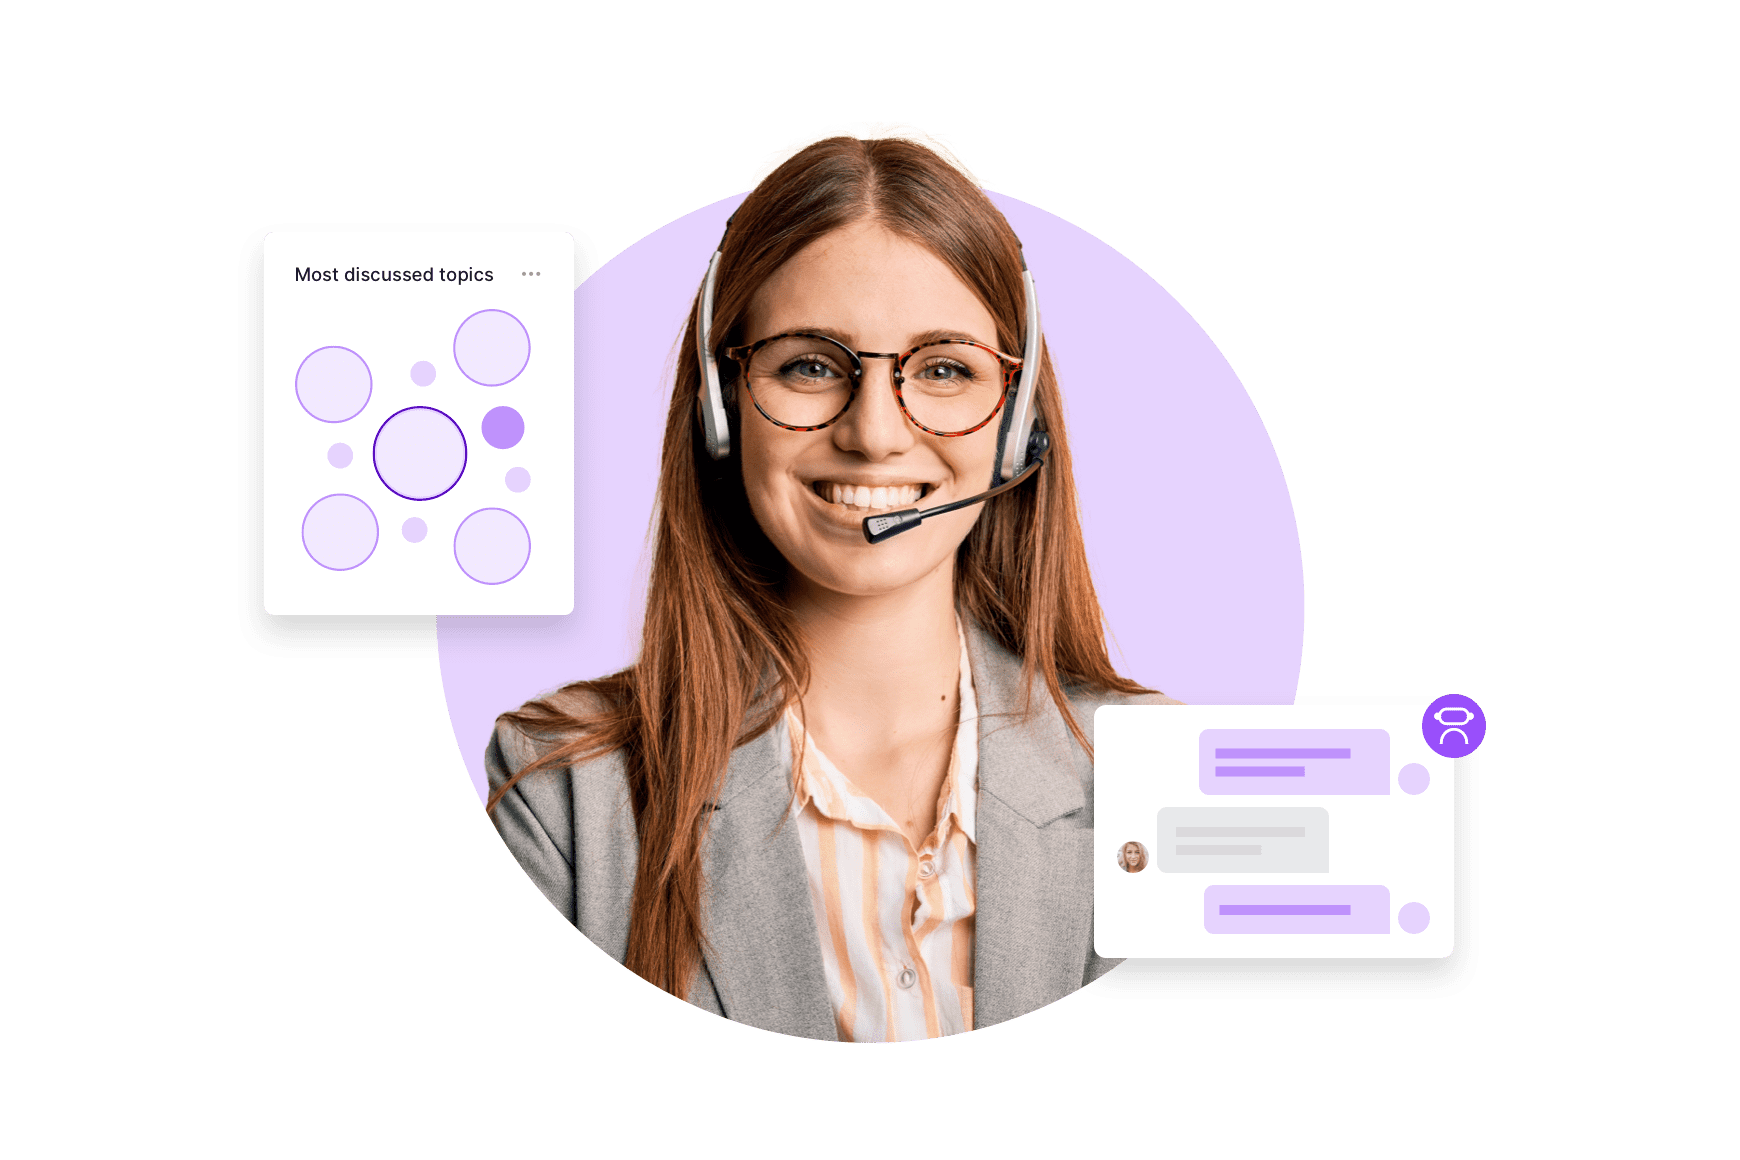 5 steps to implement an AI-powered virtual agent and expand customer self-service